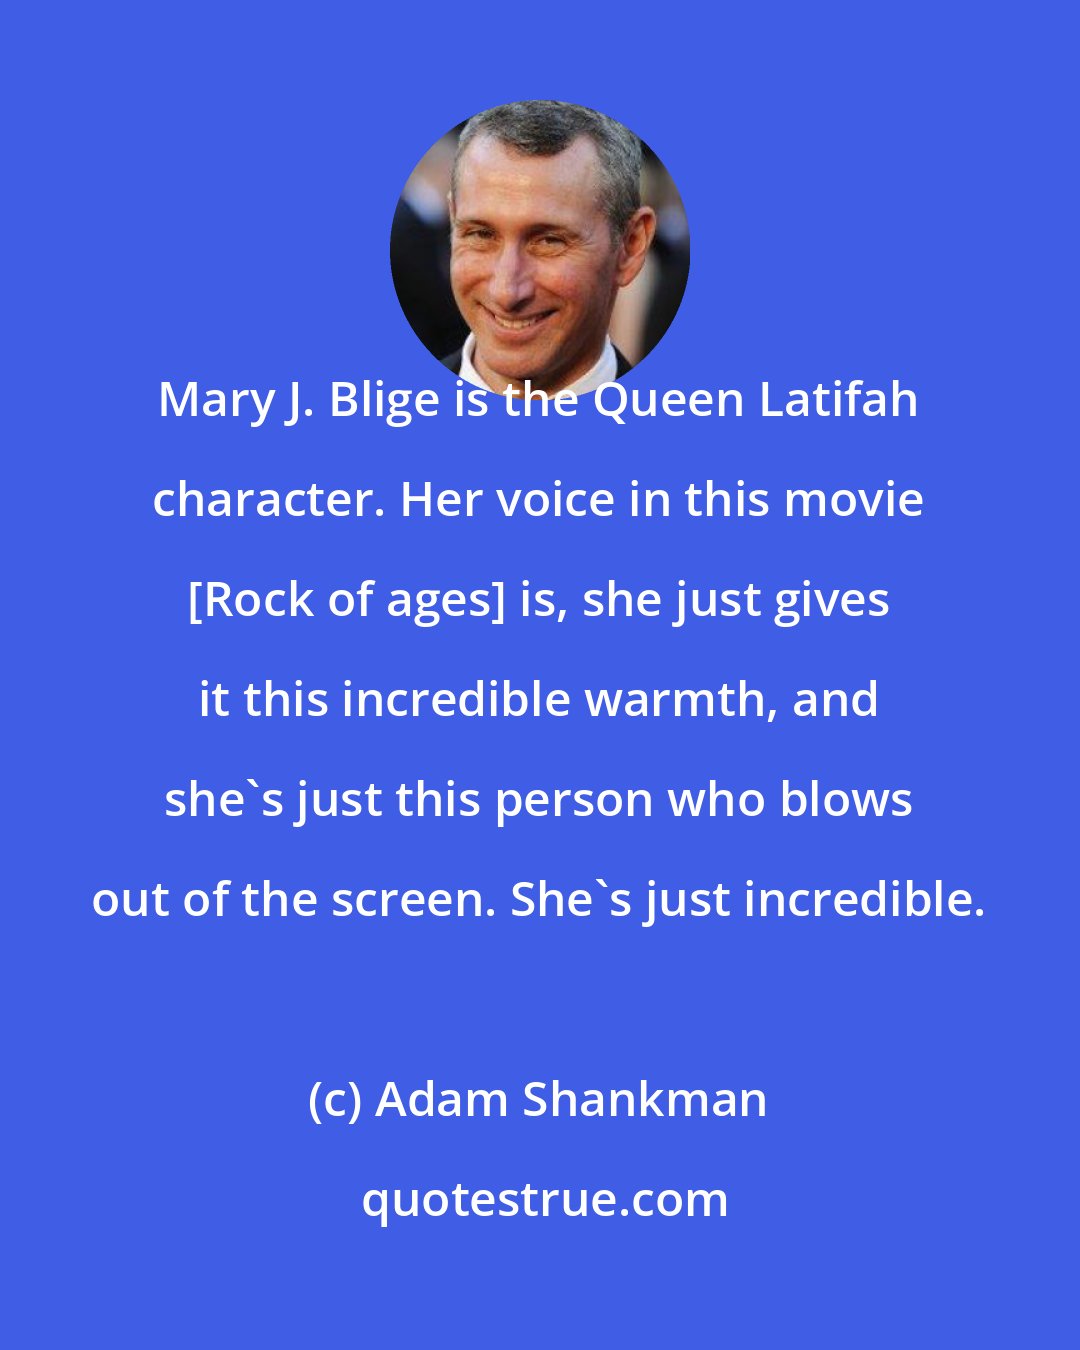 Adam Shankman: Mary J. Blige is the Queen Latifah character. Her voice in this movie [Rock of ages] is, she just gives it this incredible warmth, and she's just this person who blows out of the screen. She's just incredible.